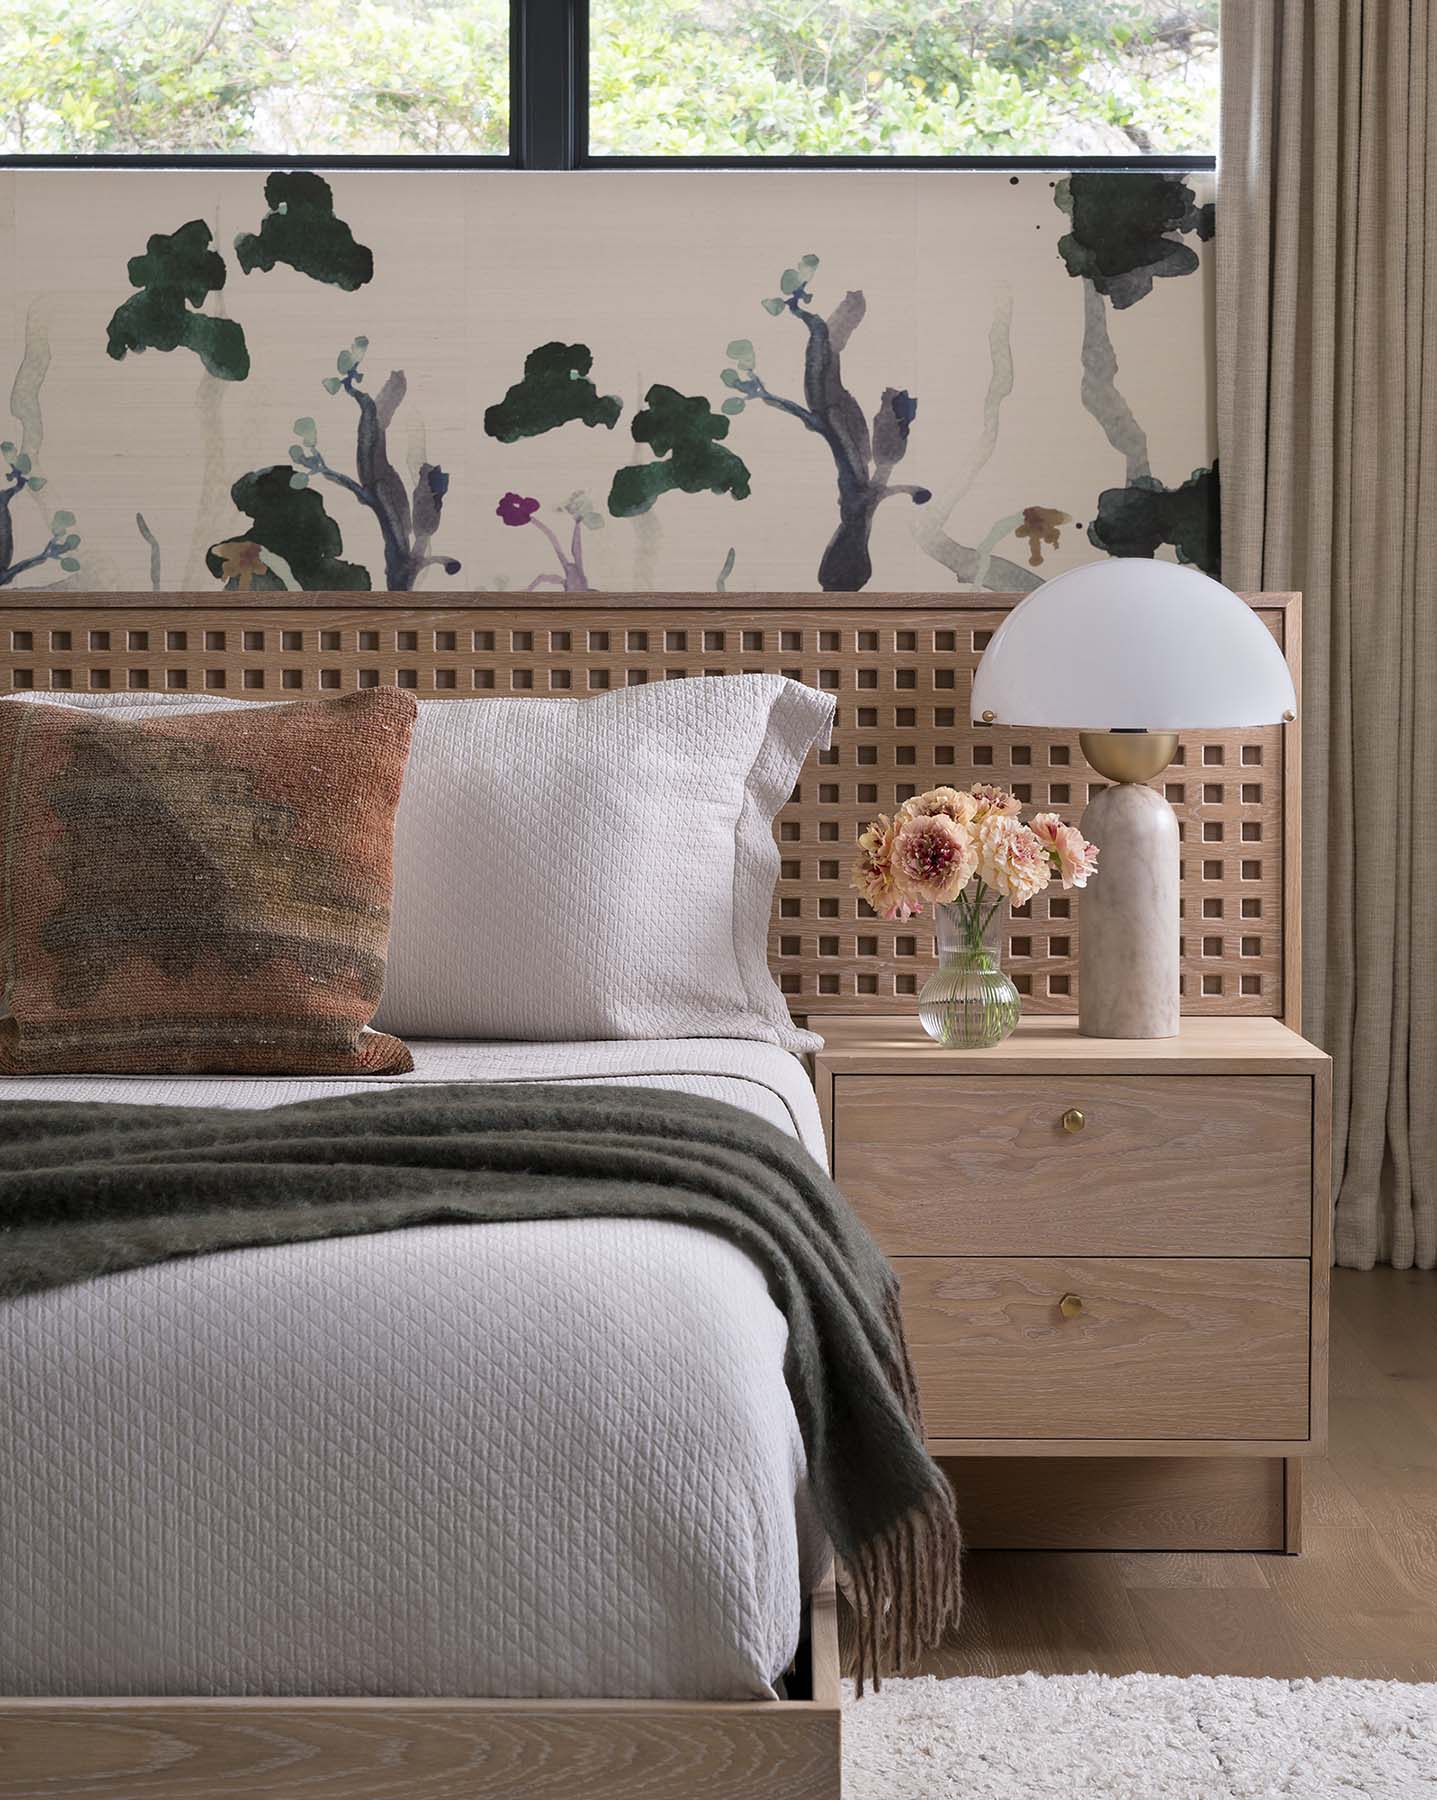 work-and-sea-grasscloth-with-painted-trees-in-bedroom-by-tribe-design-ryann-ford-photo-detail